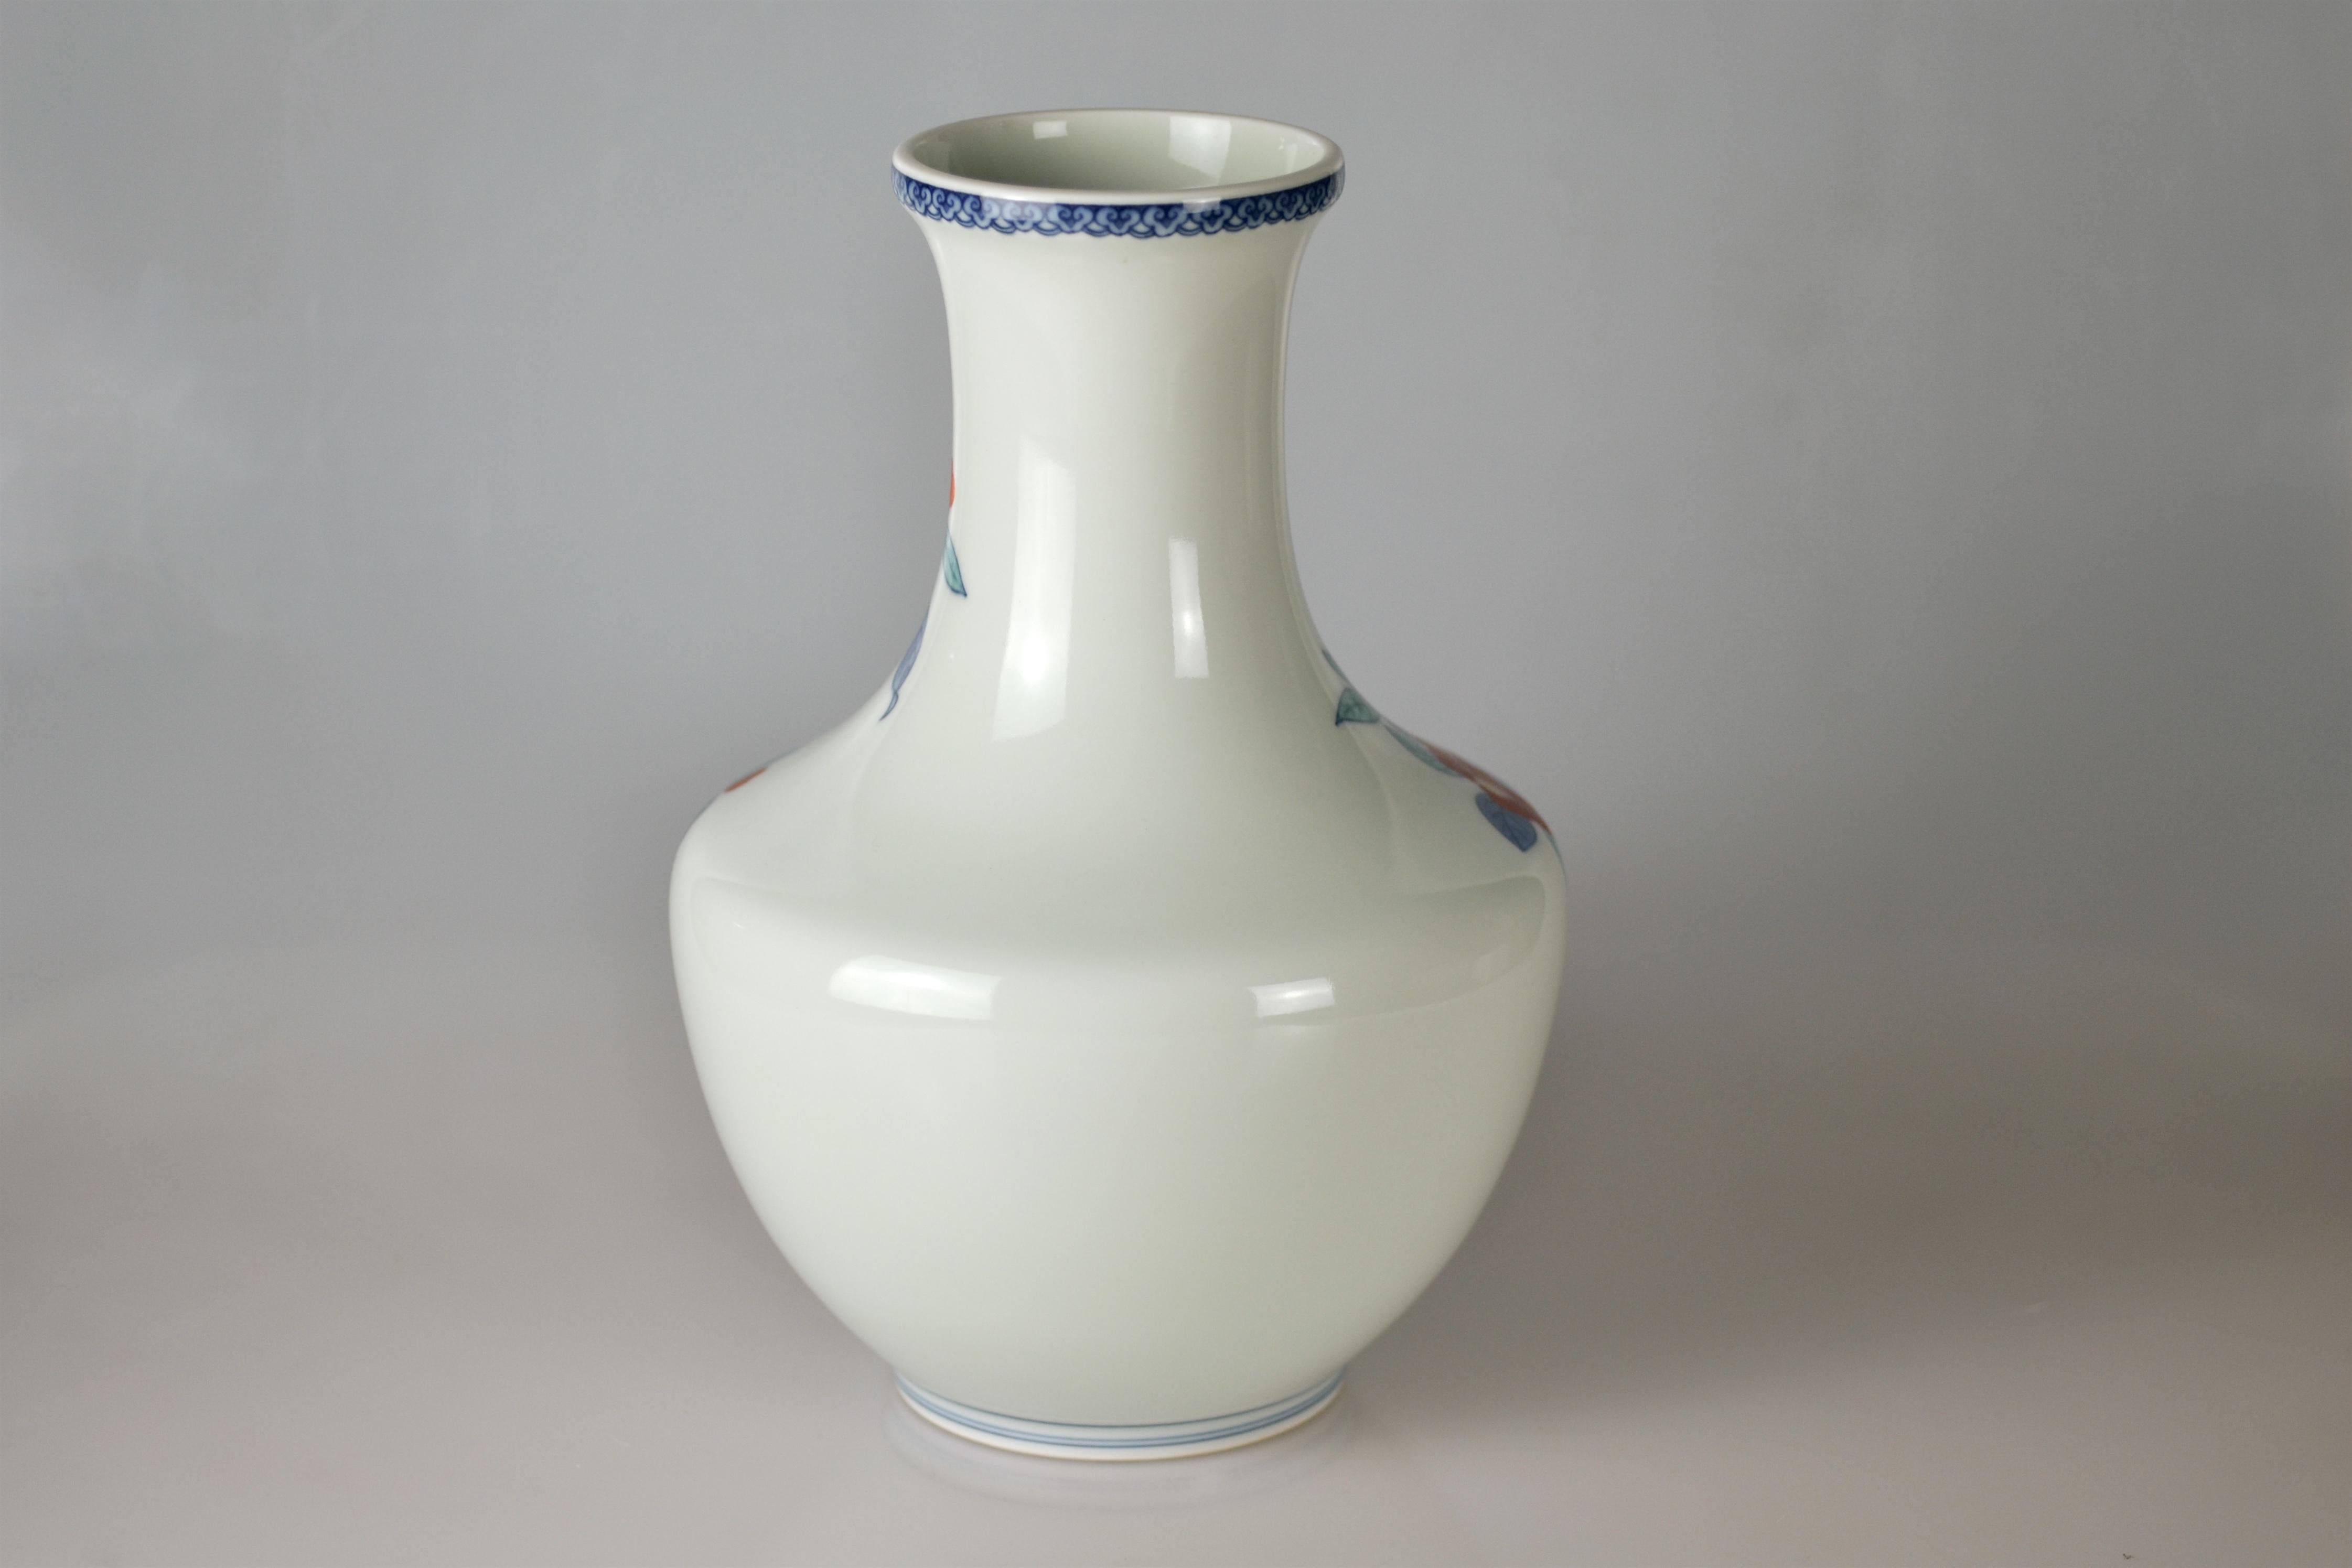 Excellent porcelain flower vase with camellia decor which is painted in underglaze blue and overglaze red, green and yellow. The vase was made by Imaizumi Imaemon XIII (1926-2001), who was designated a Living National Treasure of Japan for his